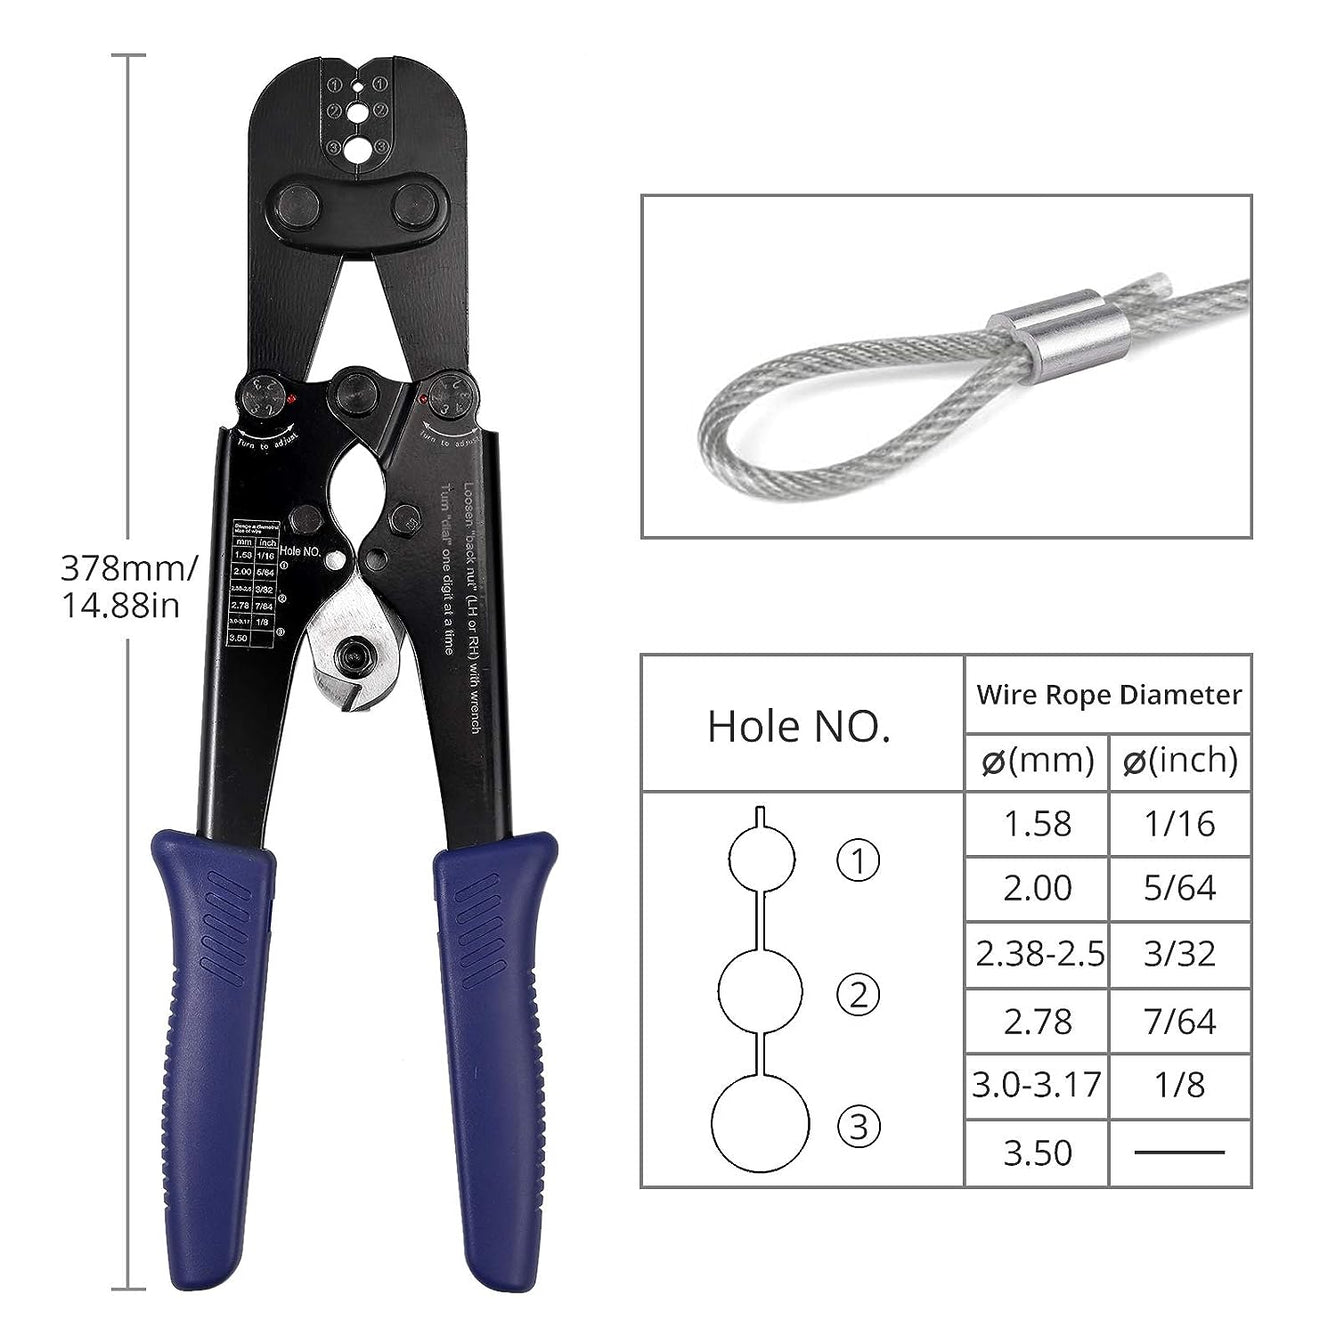 Proster 2 in 1 Wire Rope Crimping Tool Cutter from 1/16inch to 1/8inch